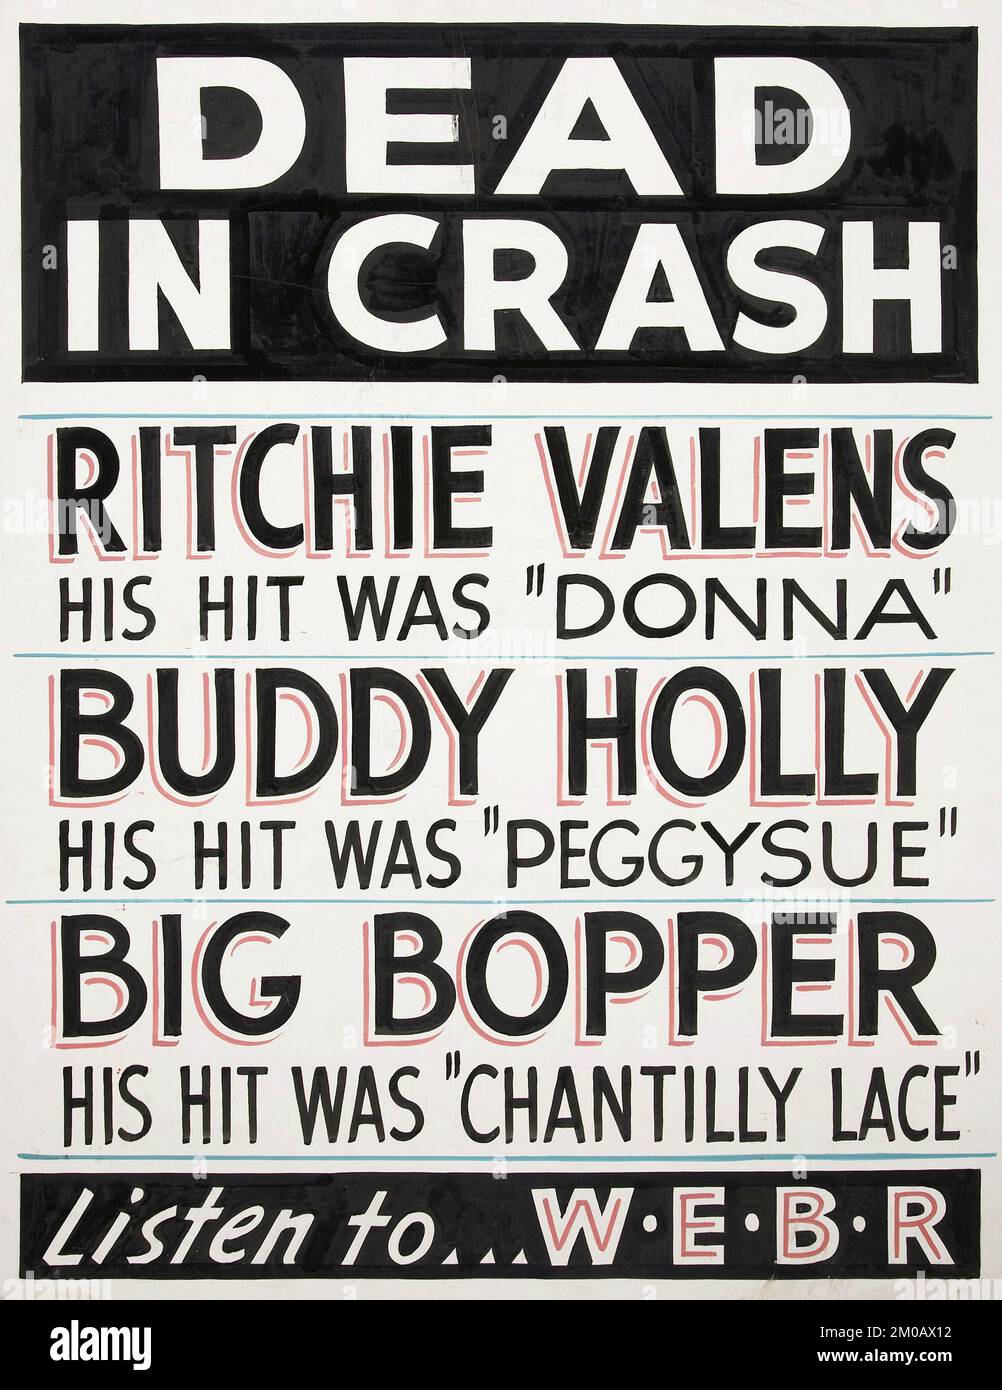 Billboard poster - Buddy Holly, Ritchie Valens and Big Bopper Dead In Crash Poster (WEBR, 1959) Stock Photo